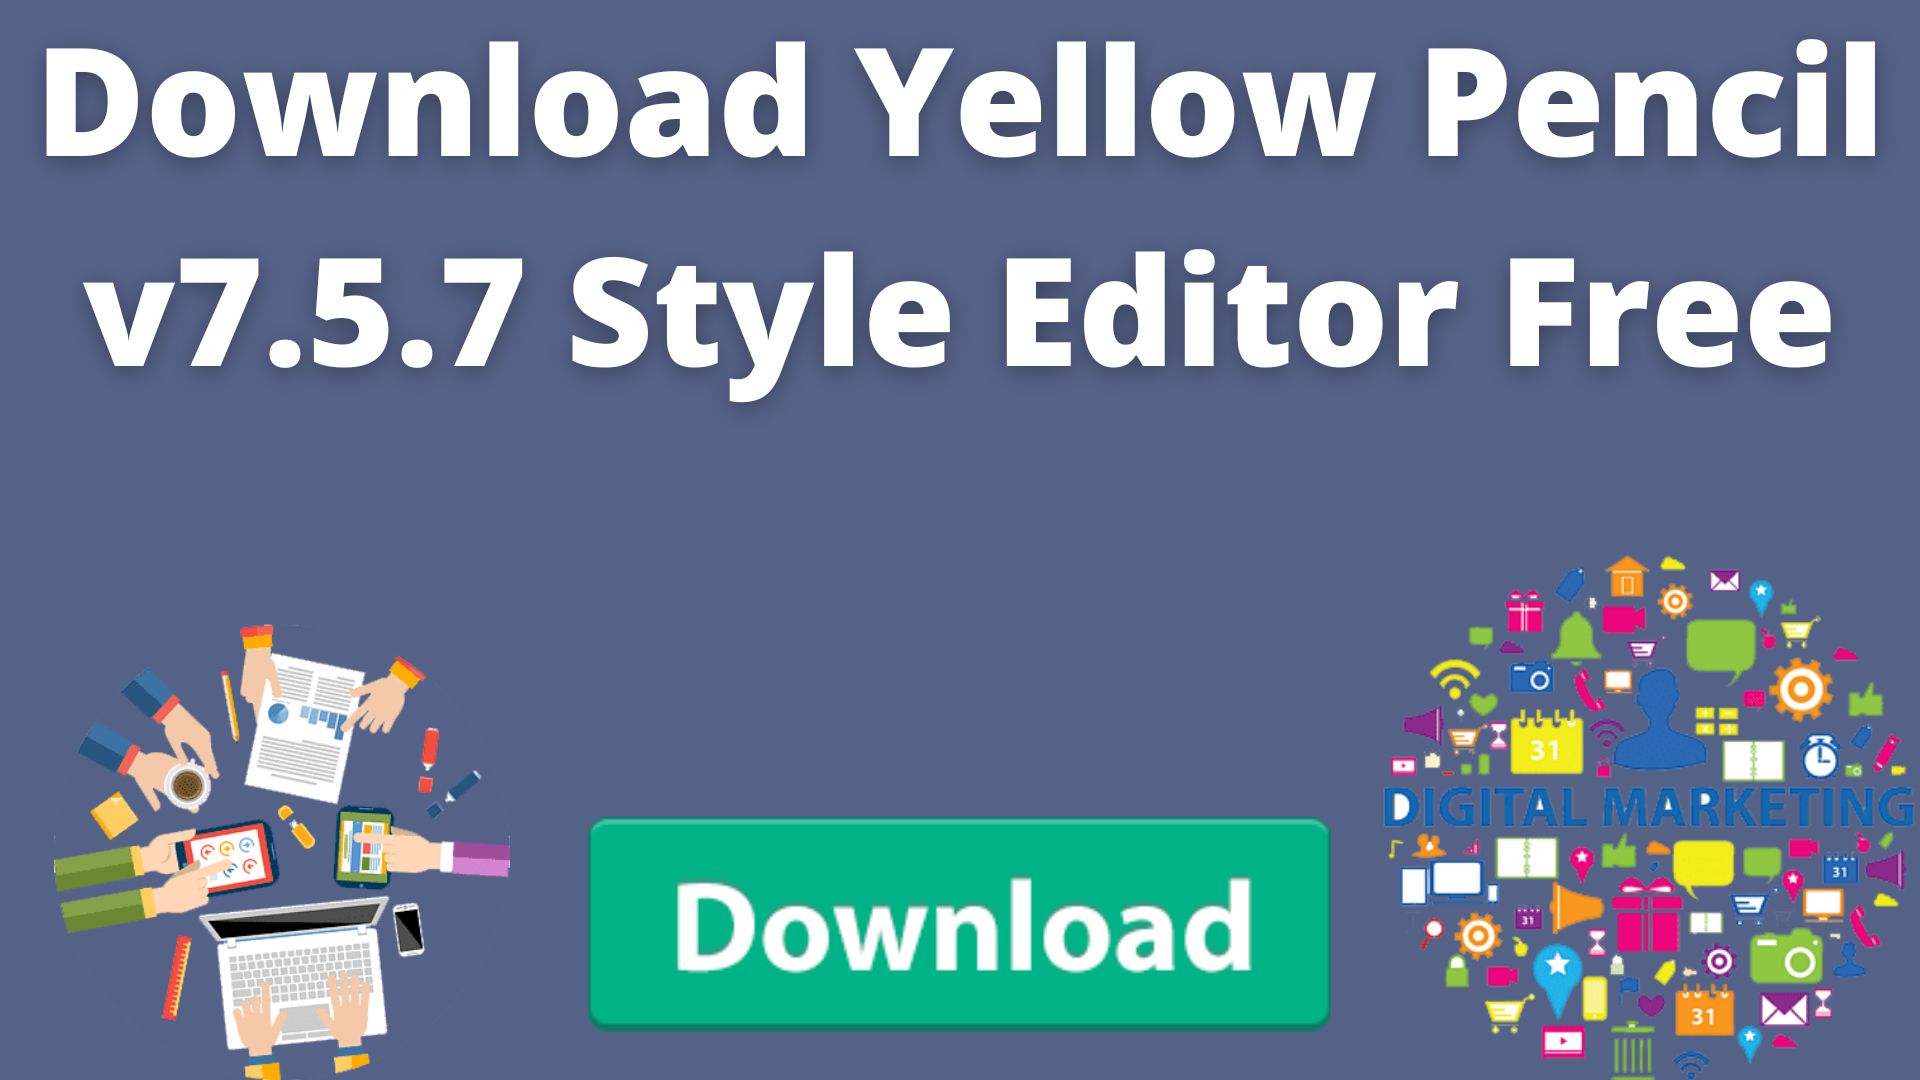 Download Yellow Pencil V7.5.7 Style Editor Free